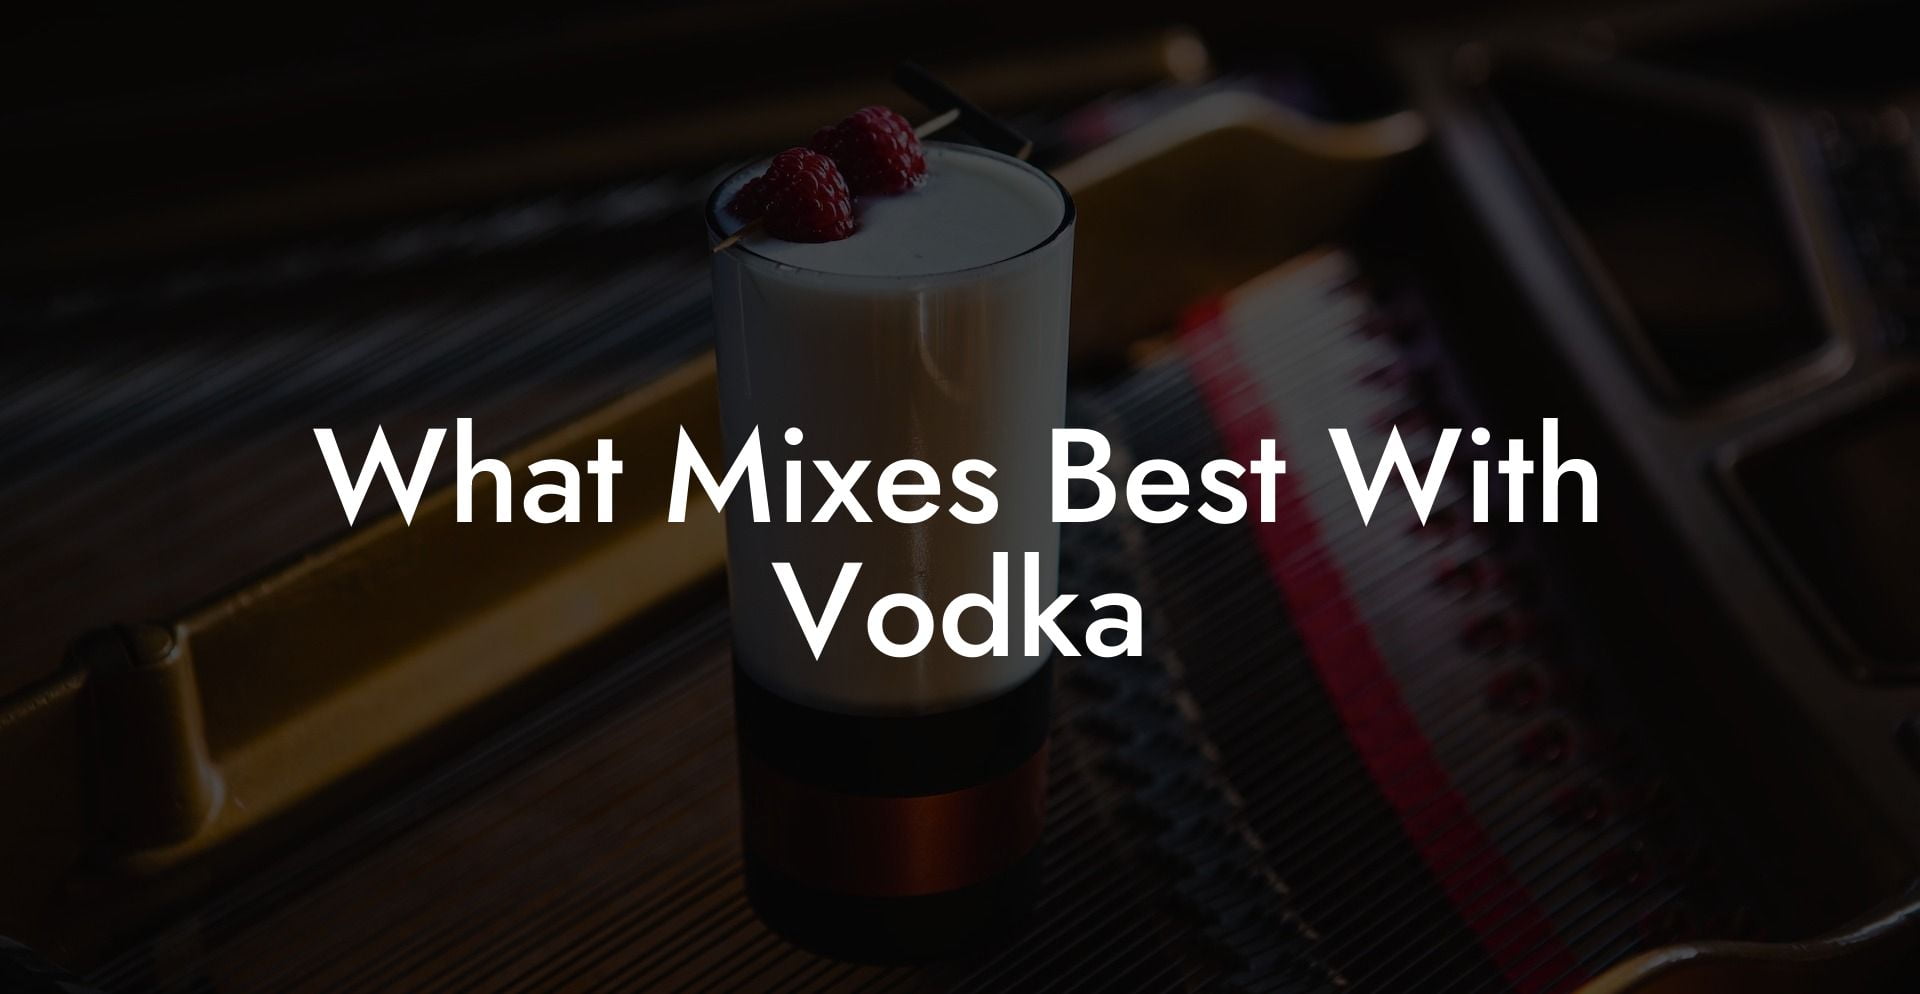 What Mixes Best With Vodka